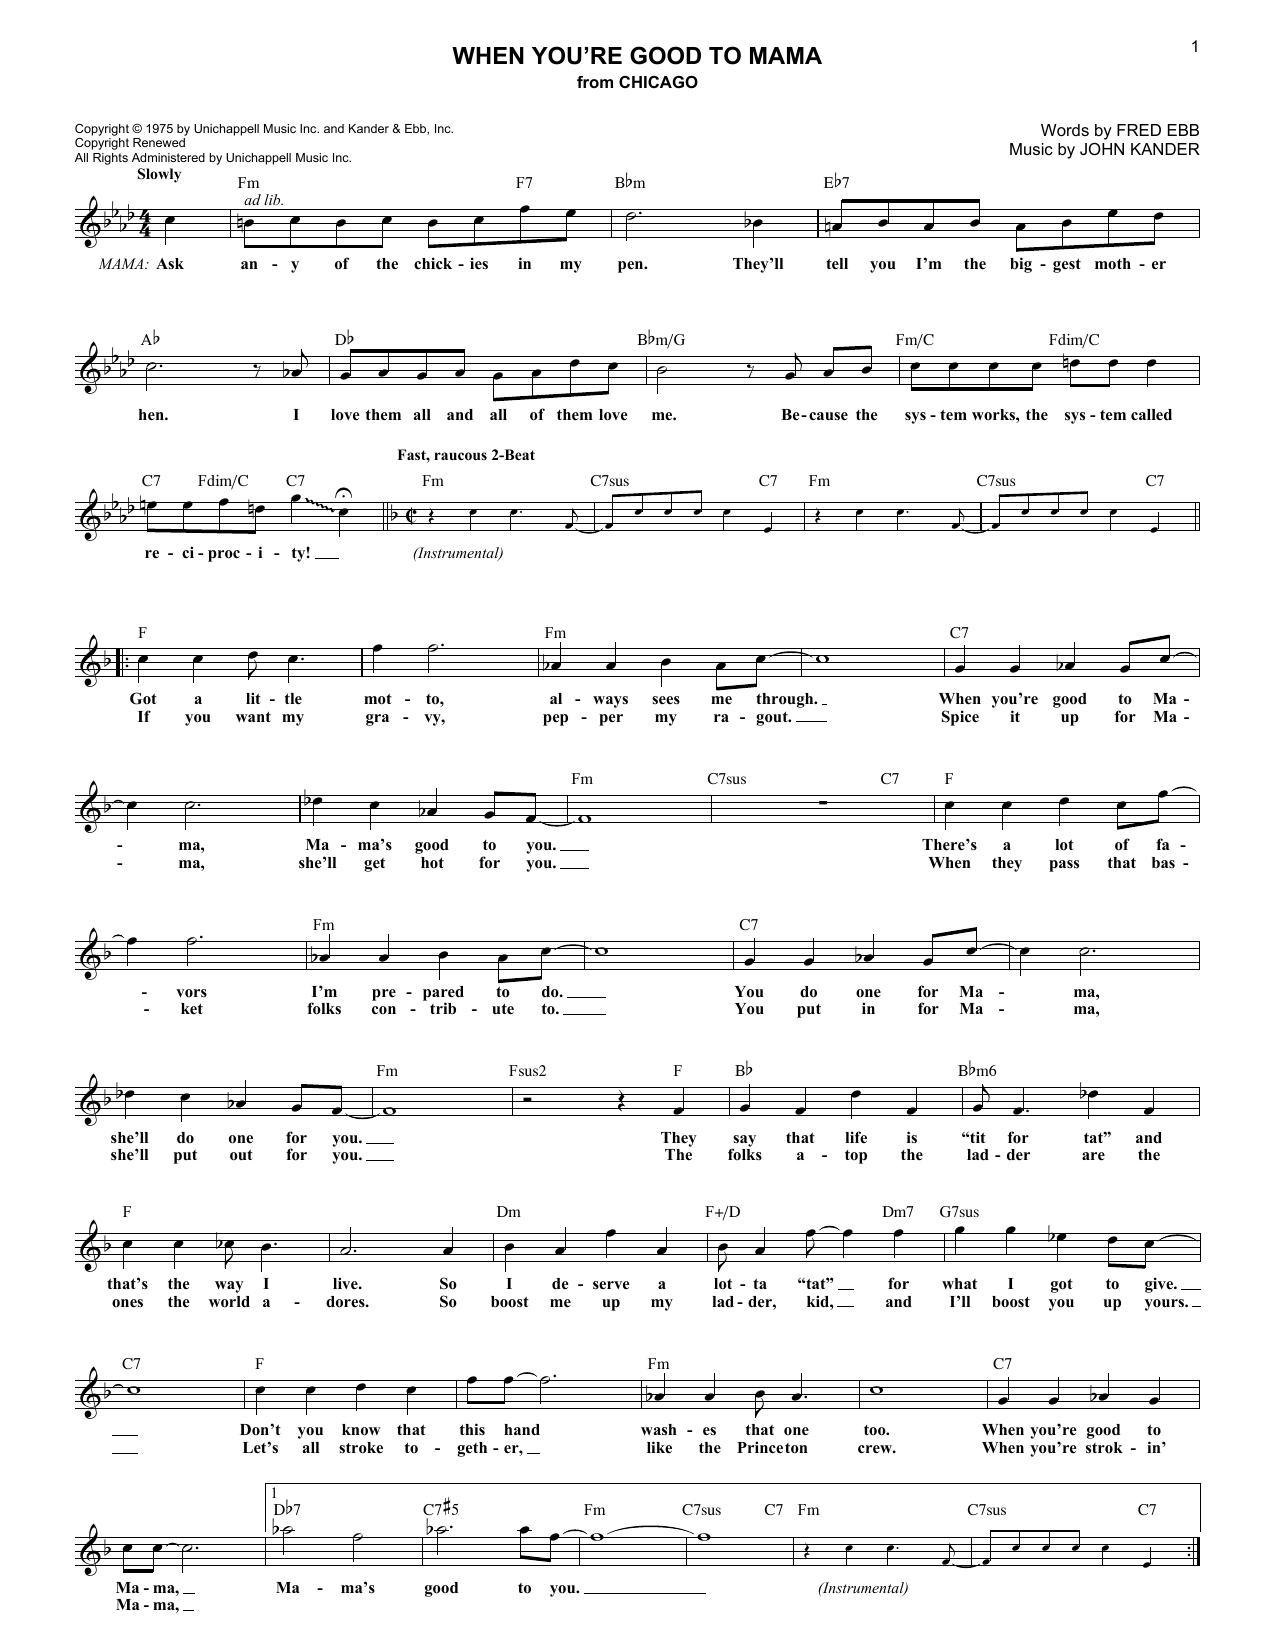 Download Kander & Ebb When You're Good To Mama Sheet Music